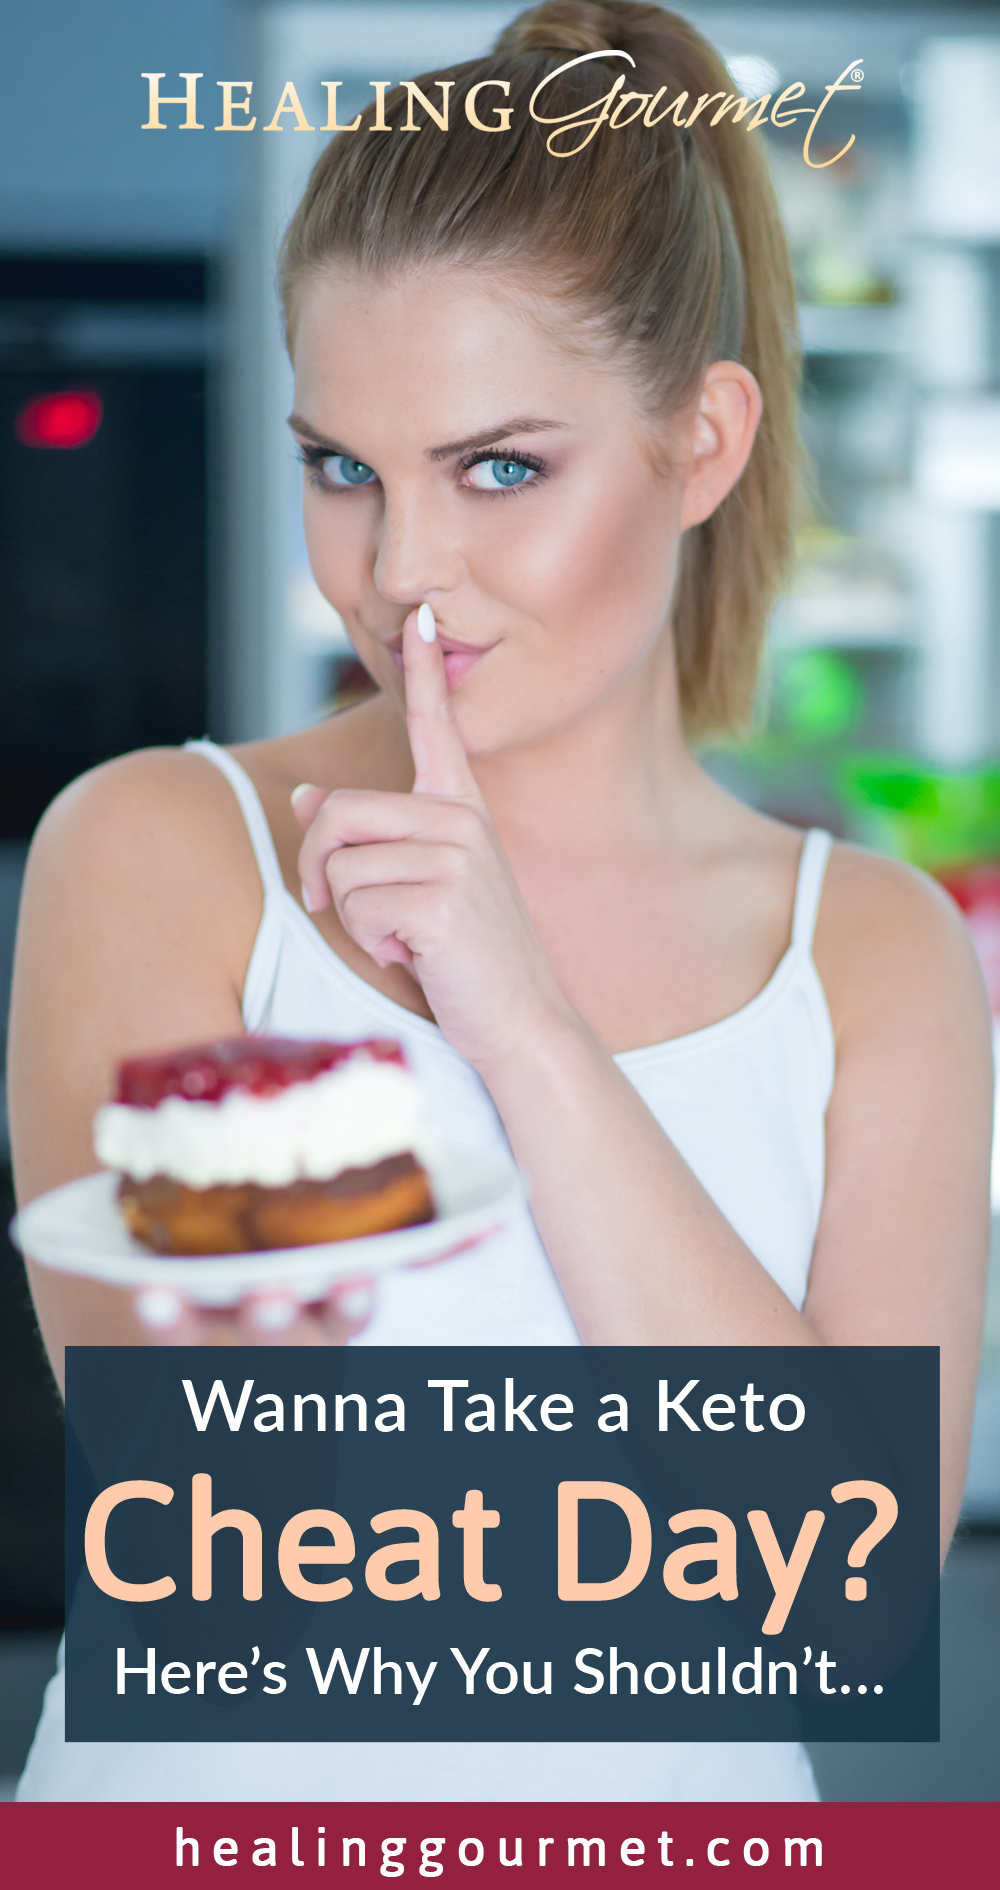 Why You Shouldn’t Cheat on Your Keto Diet